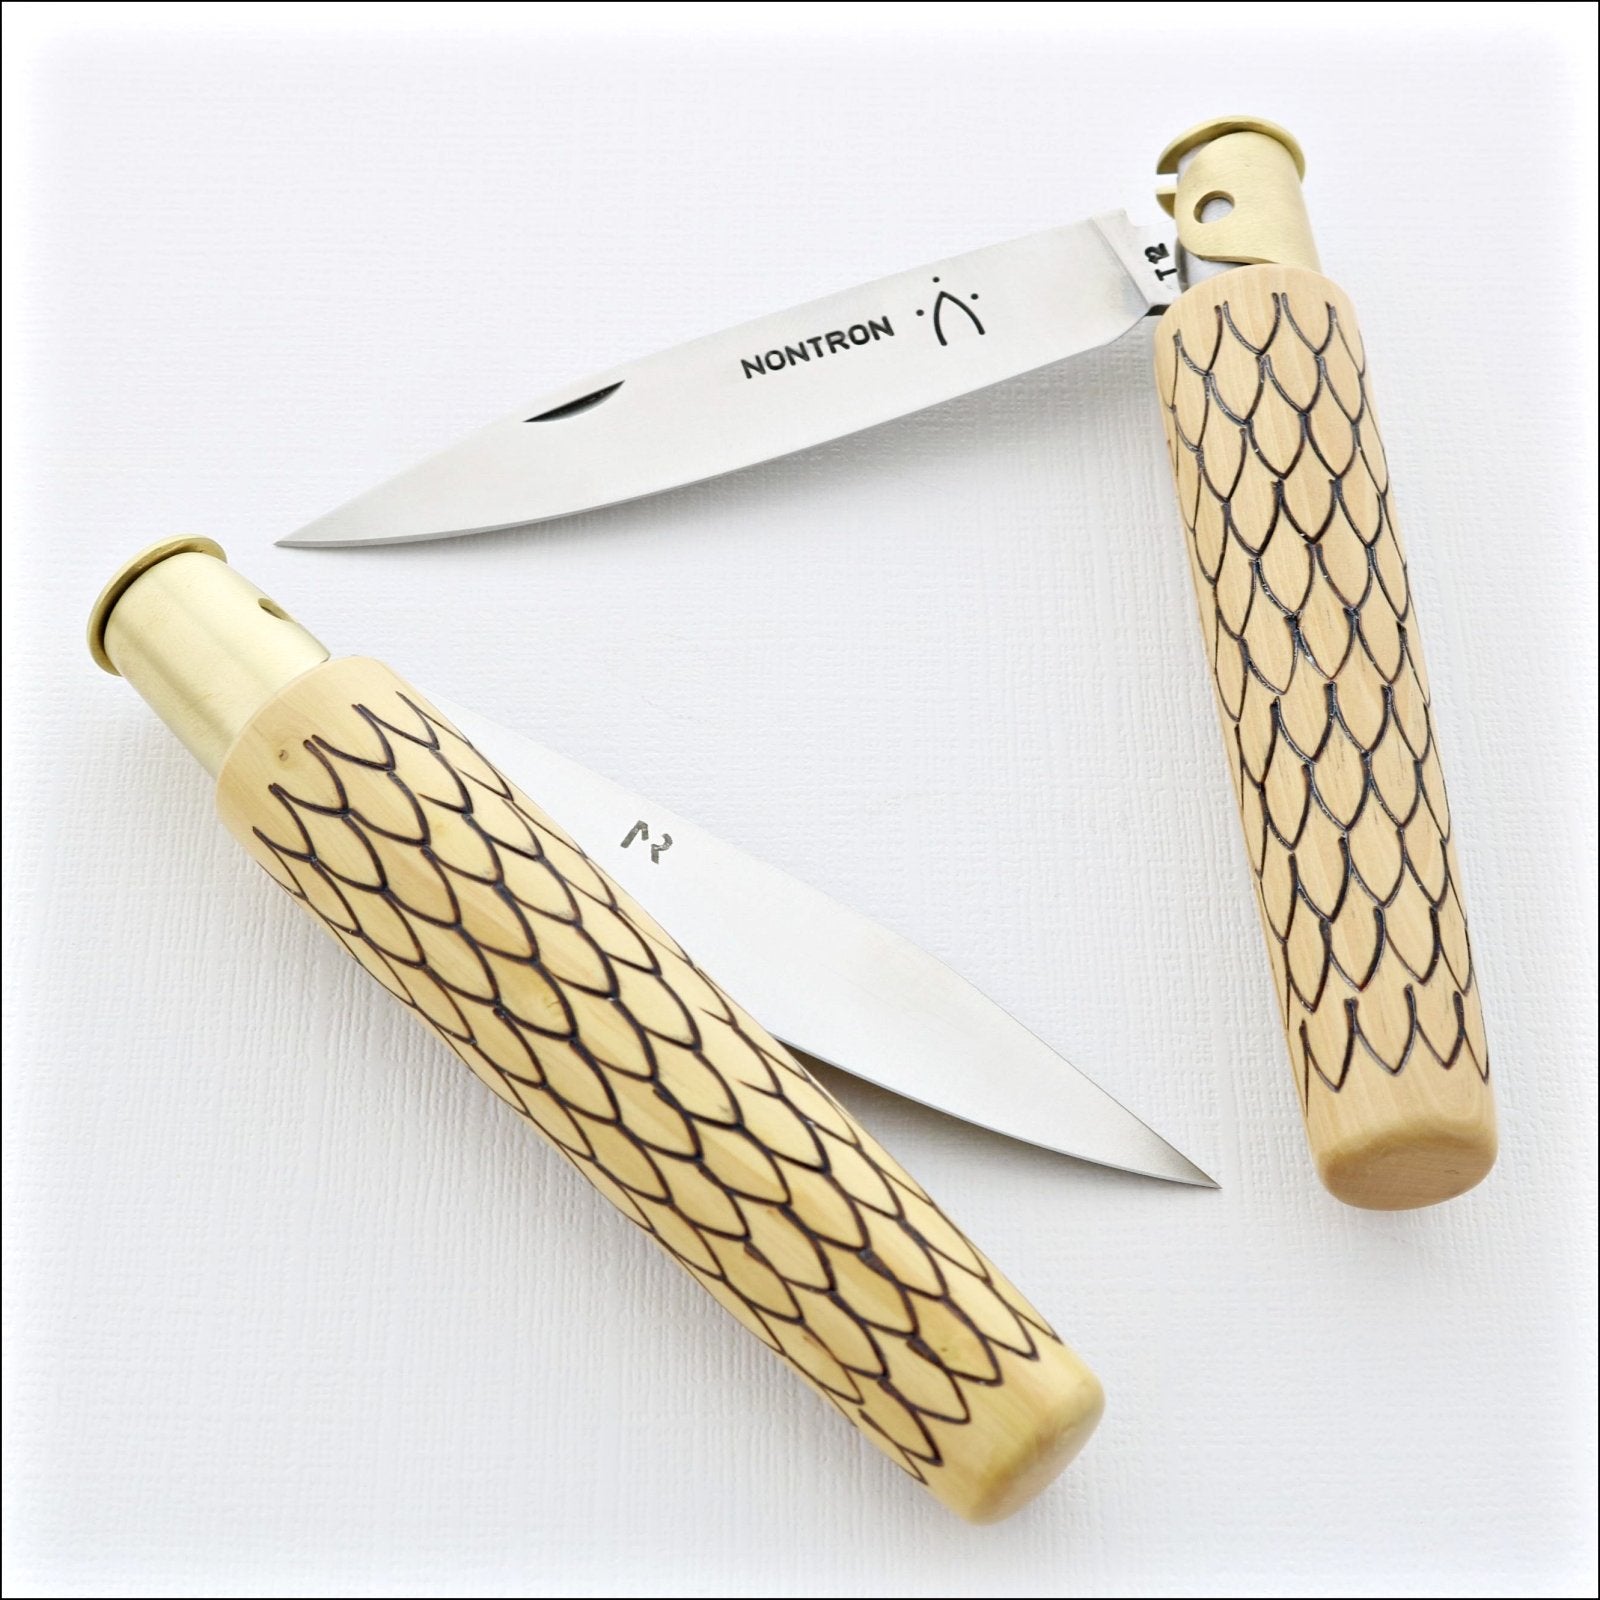 Nontron Pocket Knife No25 - Feathered Grand Duc - Laguiole Imports